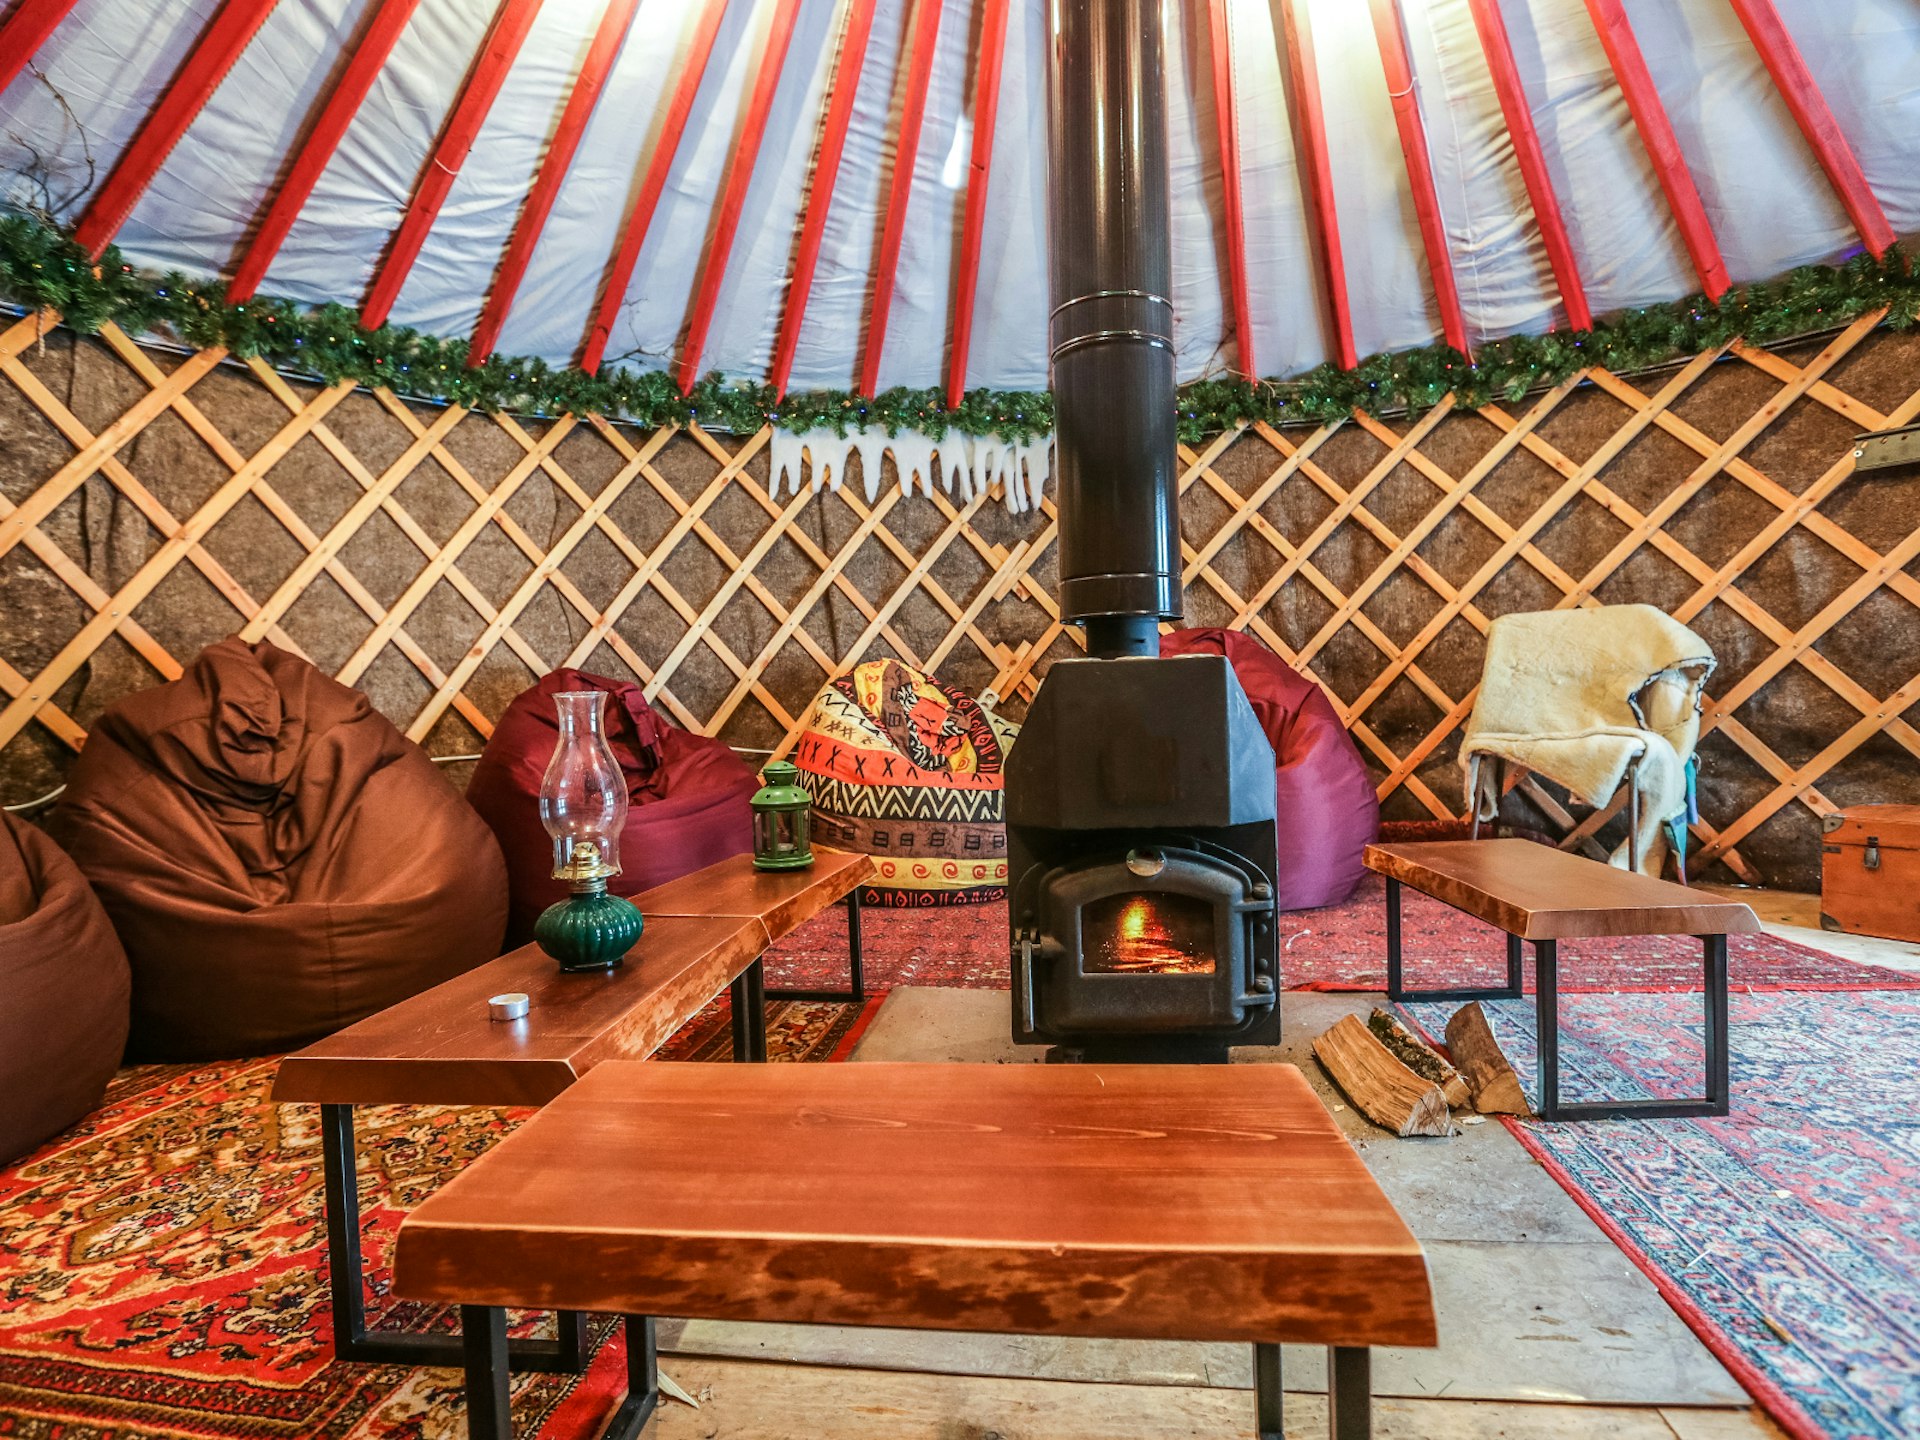 The interior of a Mongolian-style yurt